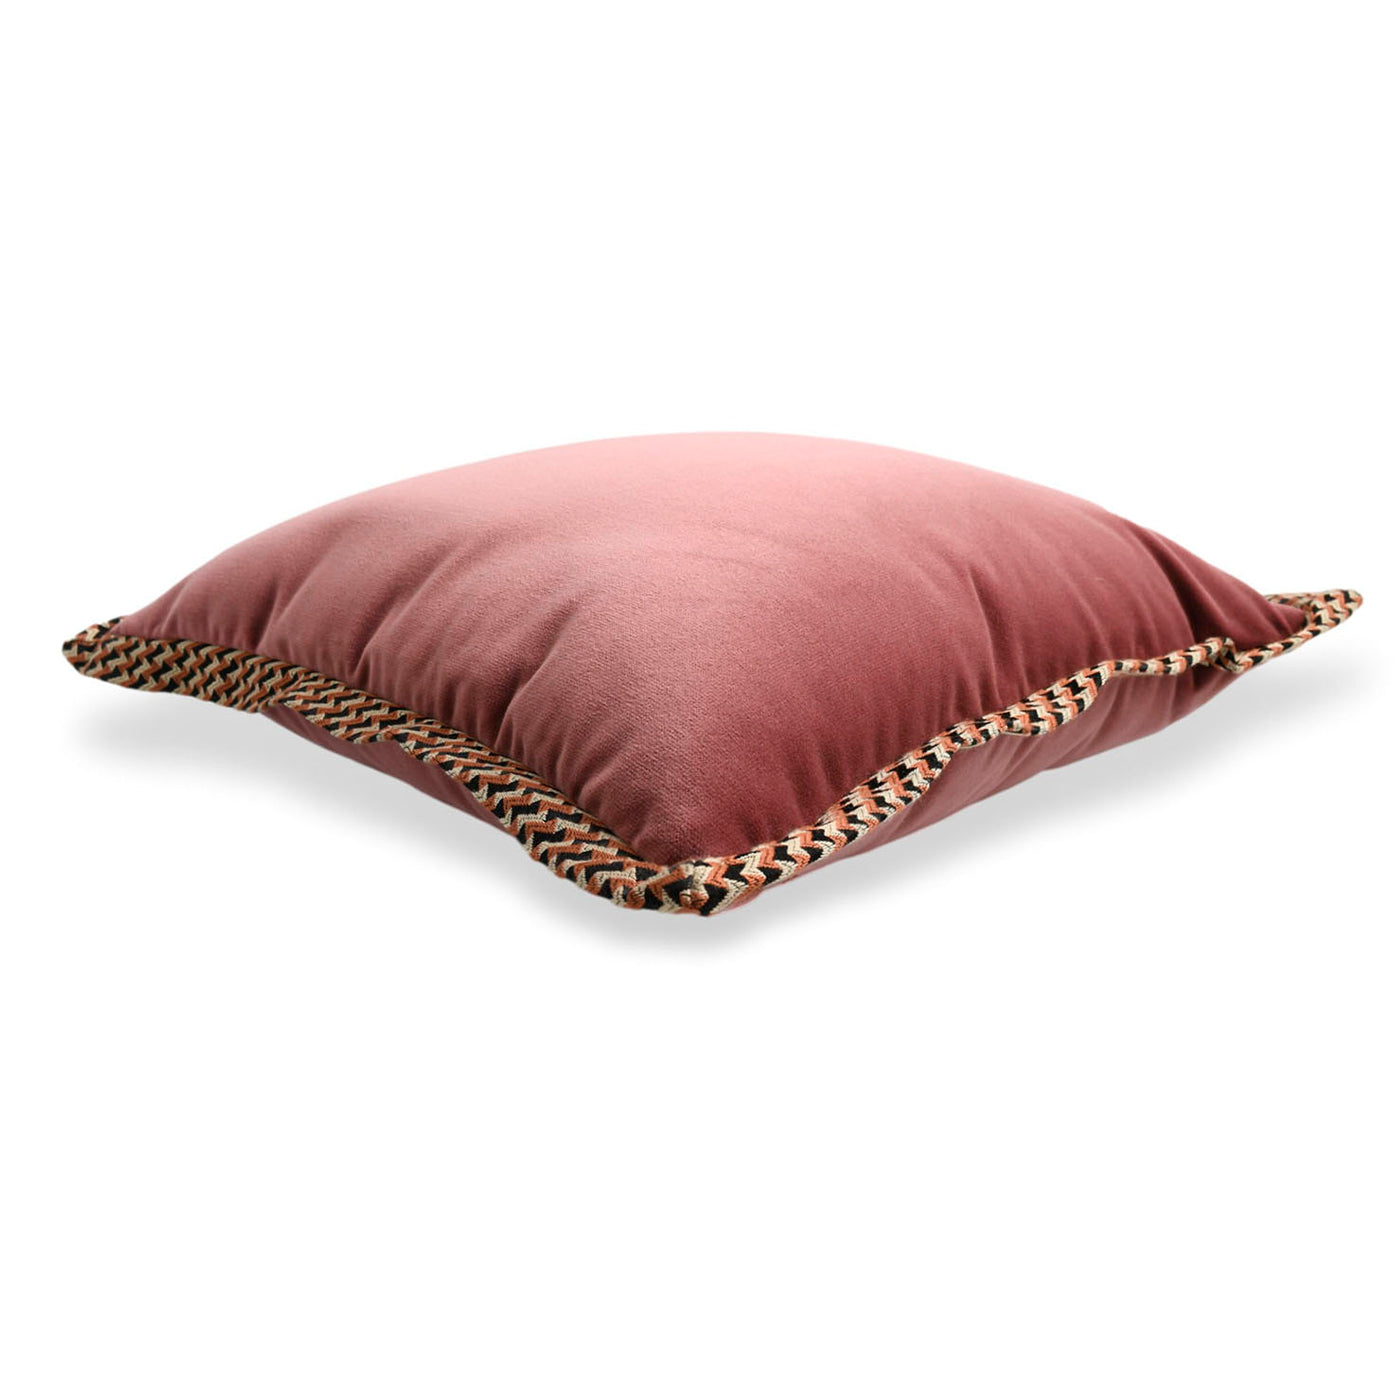 Most Carrè Flat Cushion in cotton velvet and Micro-Patterned jacquard fabric - Alternative view 1